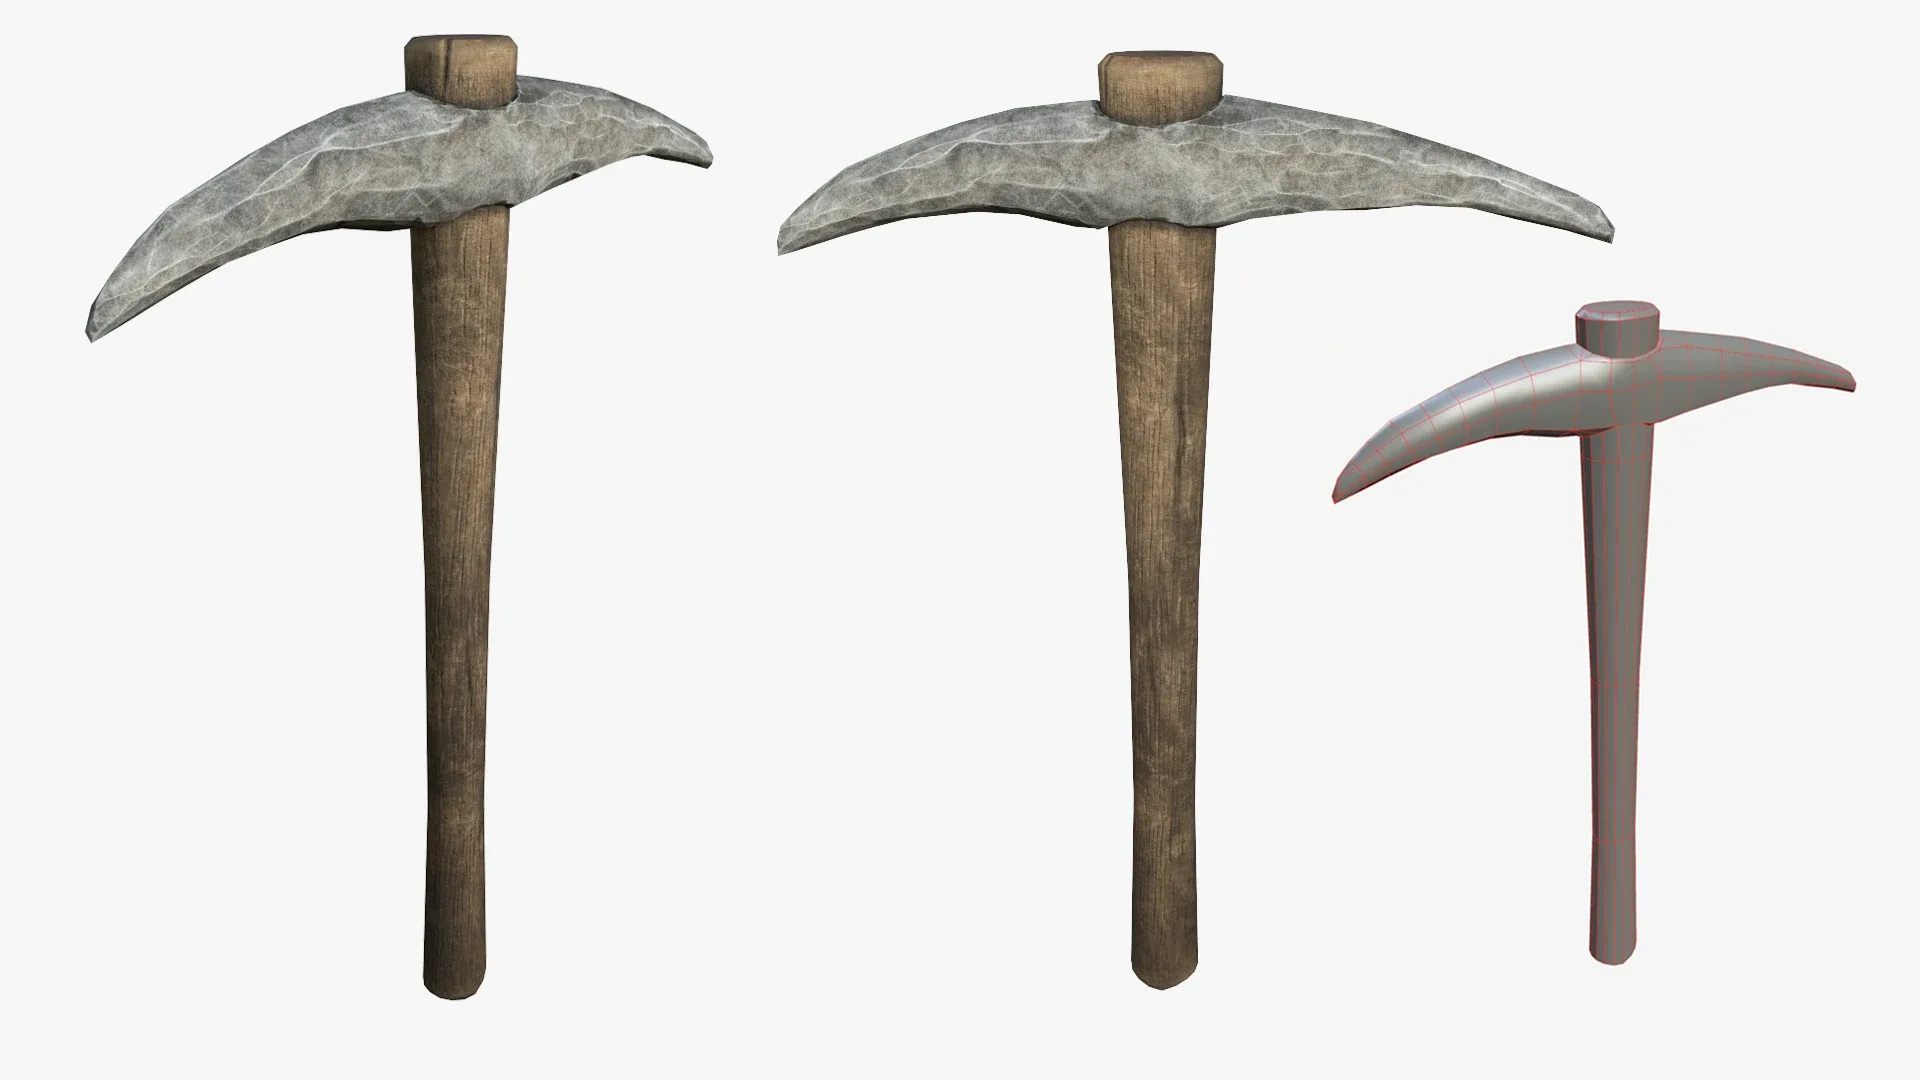 Pickaxe Pack